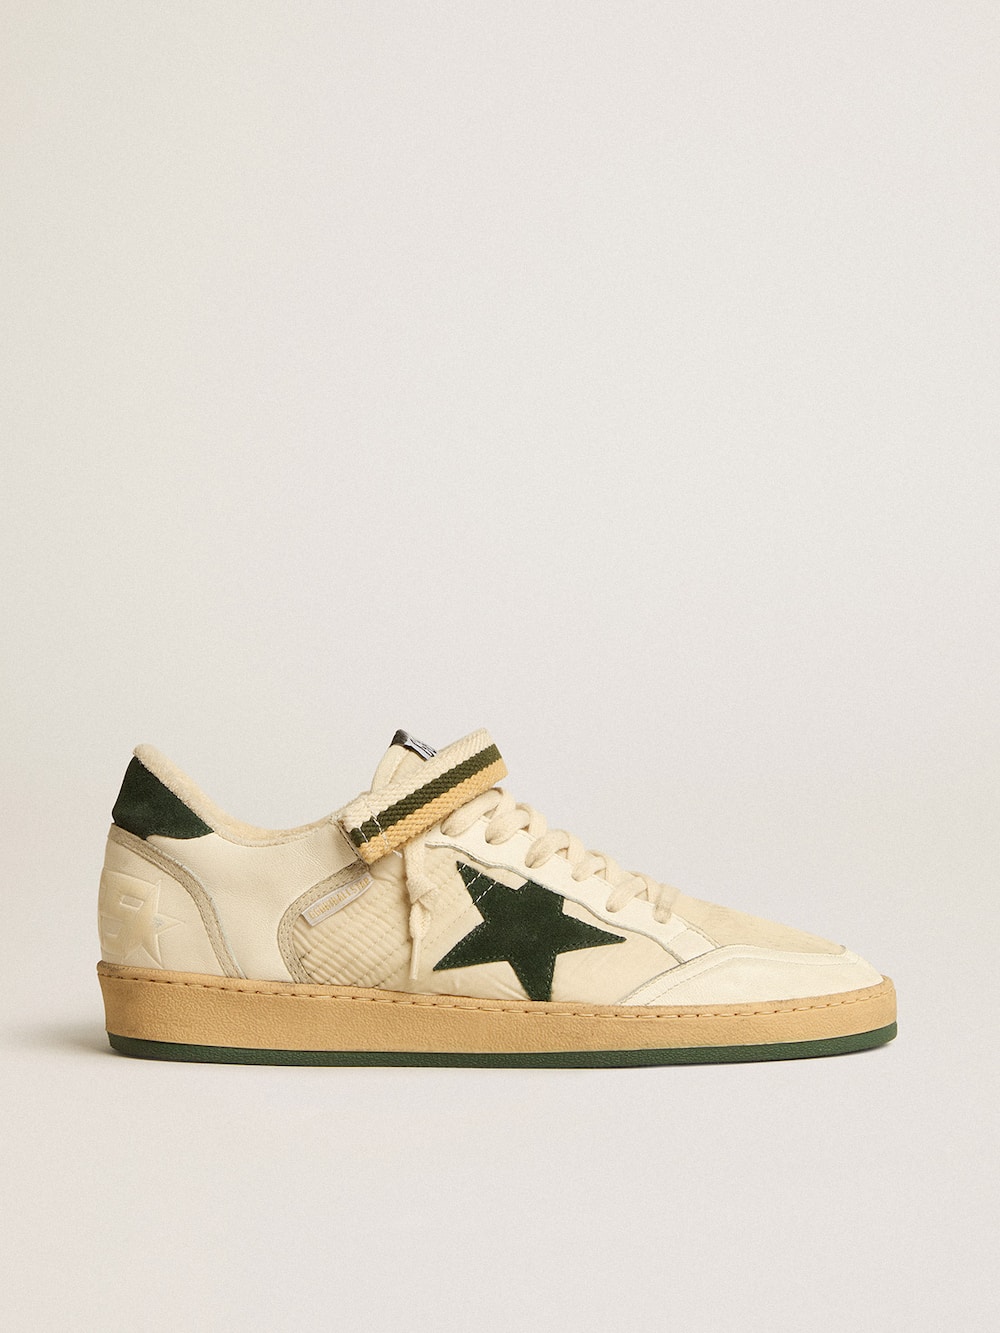 Golden Goose - Ball Star in nylon and nappa with green suede star and heel tab in 